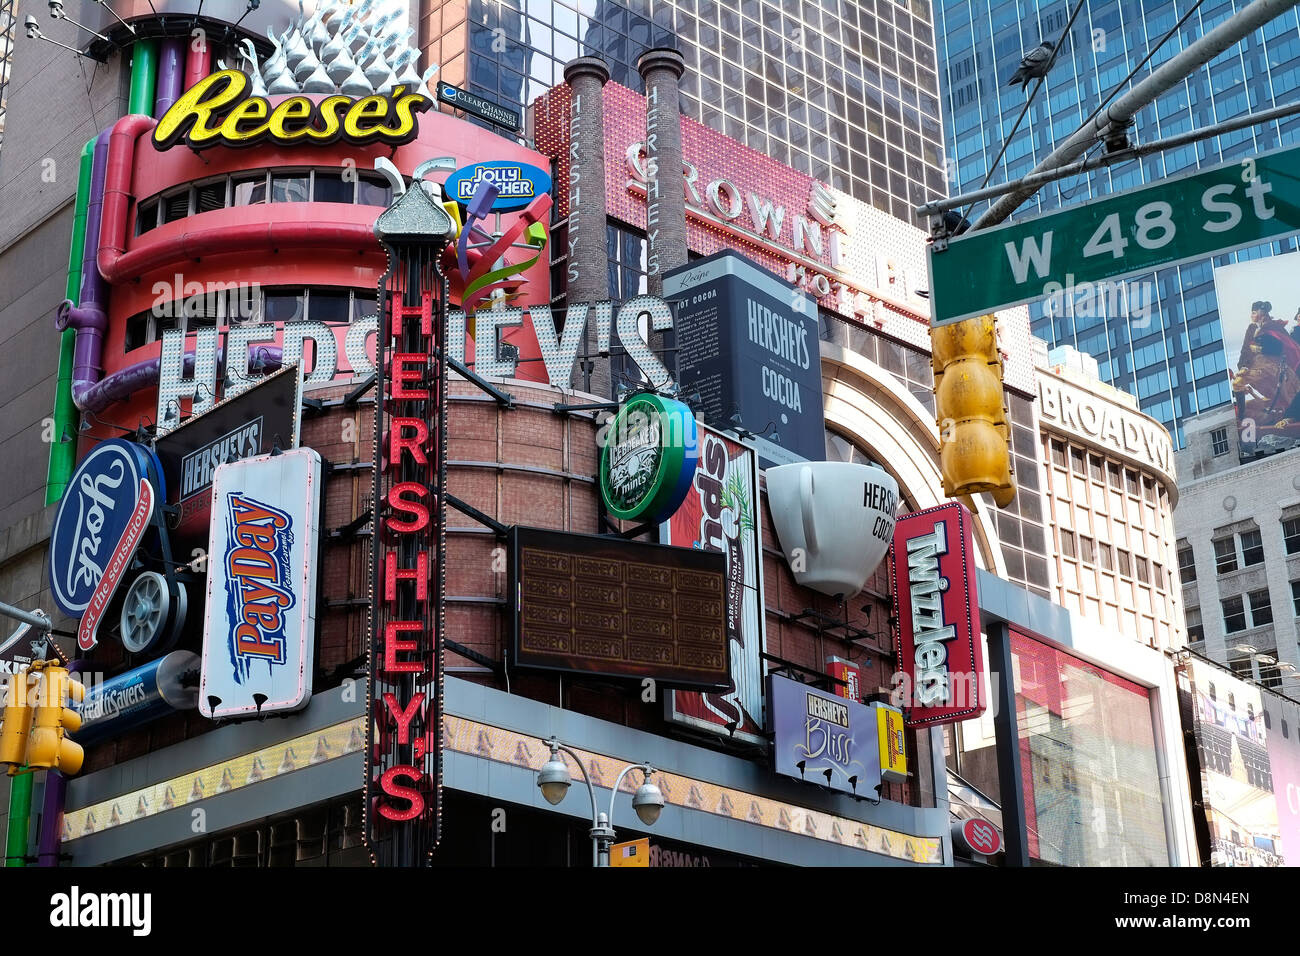 Corporate billboards on the side of a building in Times Square, New York City. Stock Photo